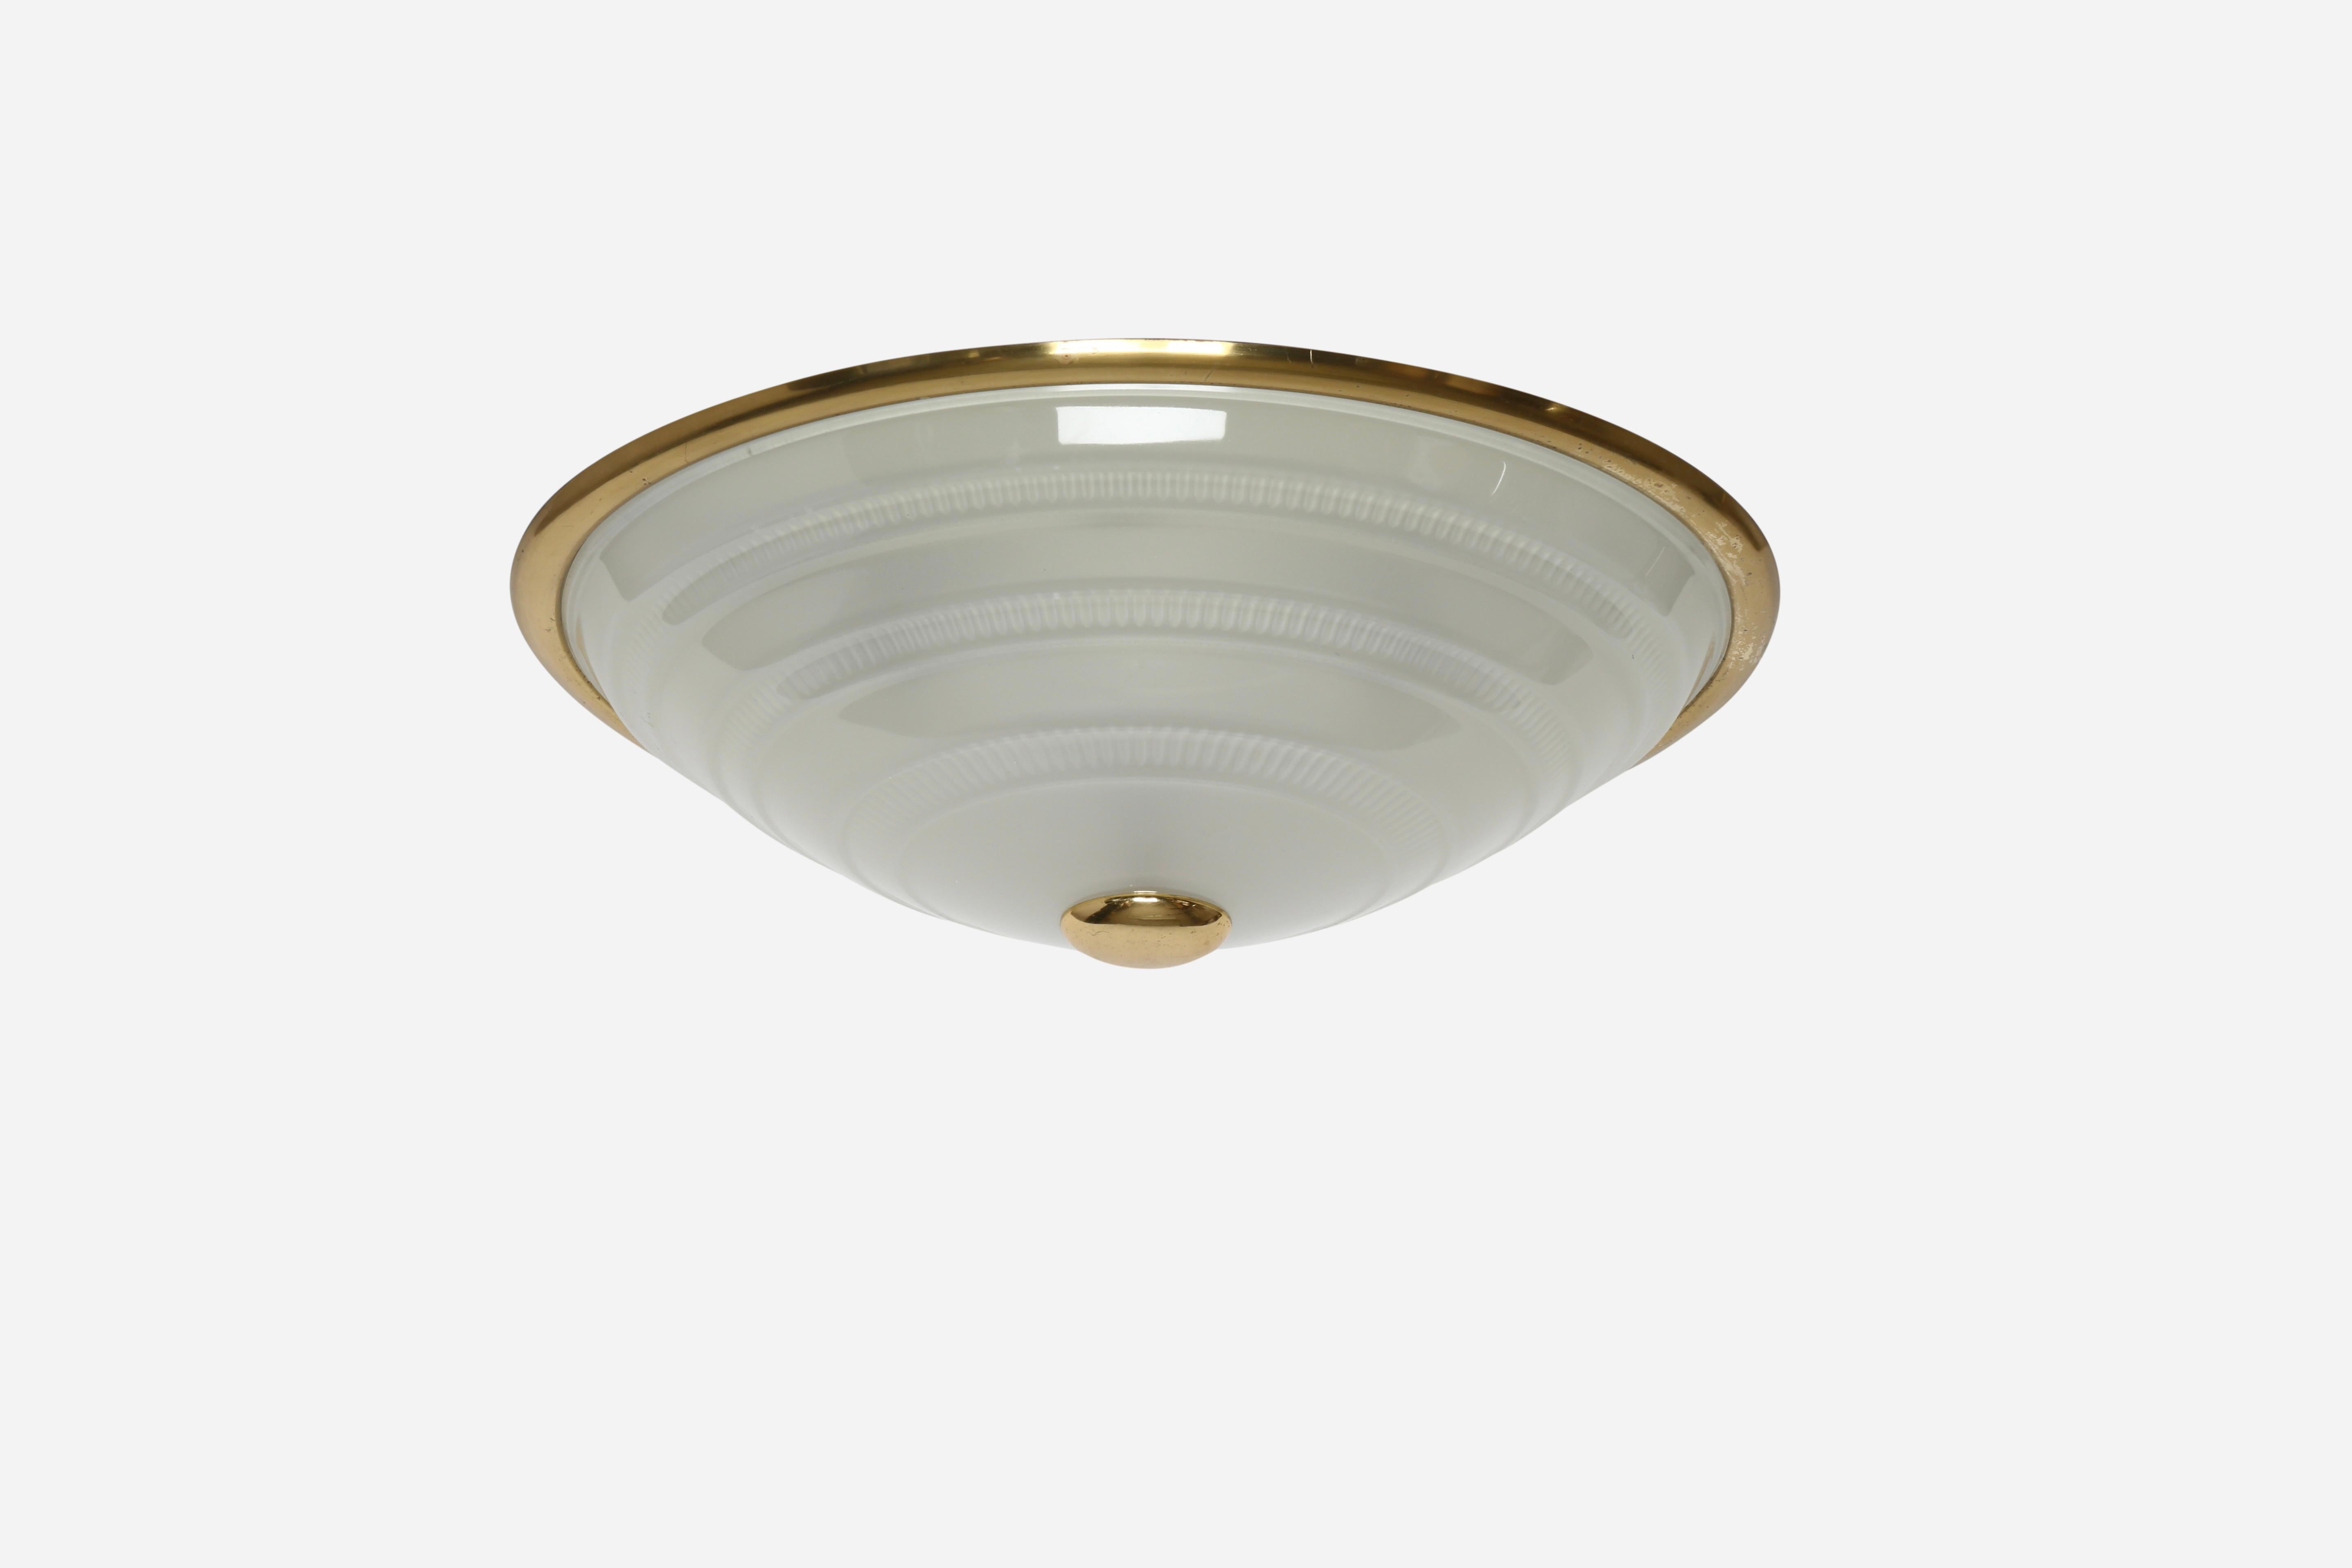 Murano glass Italian flush mount ceiling light
Designed and made in Italy in 1960s.
Textured glass, brass frame.
Takes 4 candelabra bulbs.
Complimentary US rewiring upon request.

We take pride in bringing vintage fixtures to their full glory